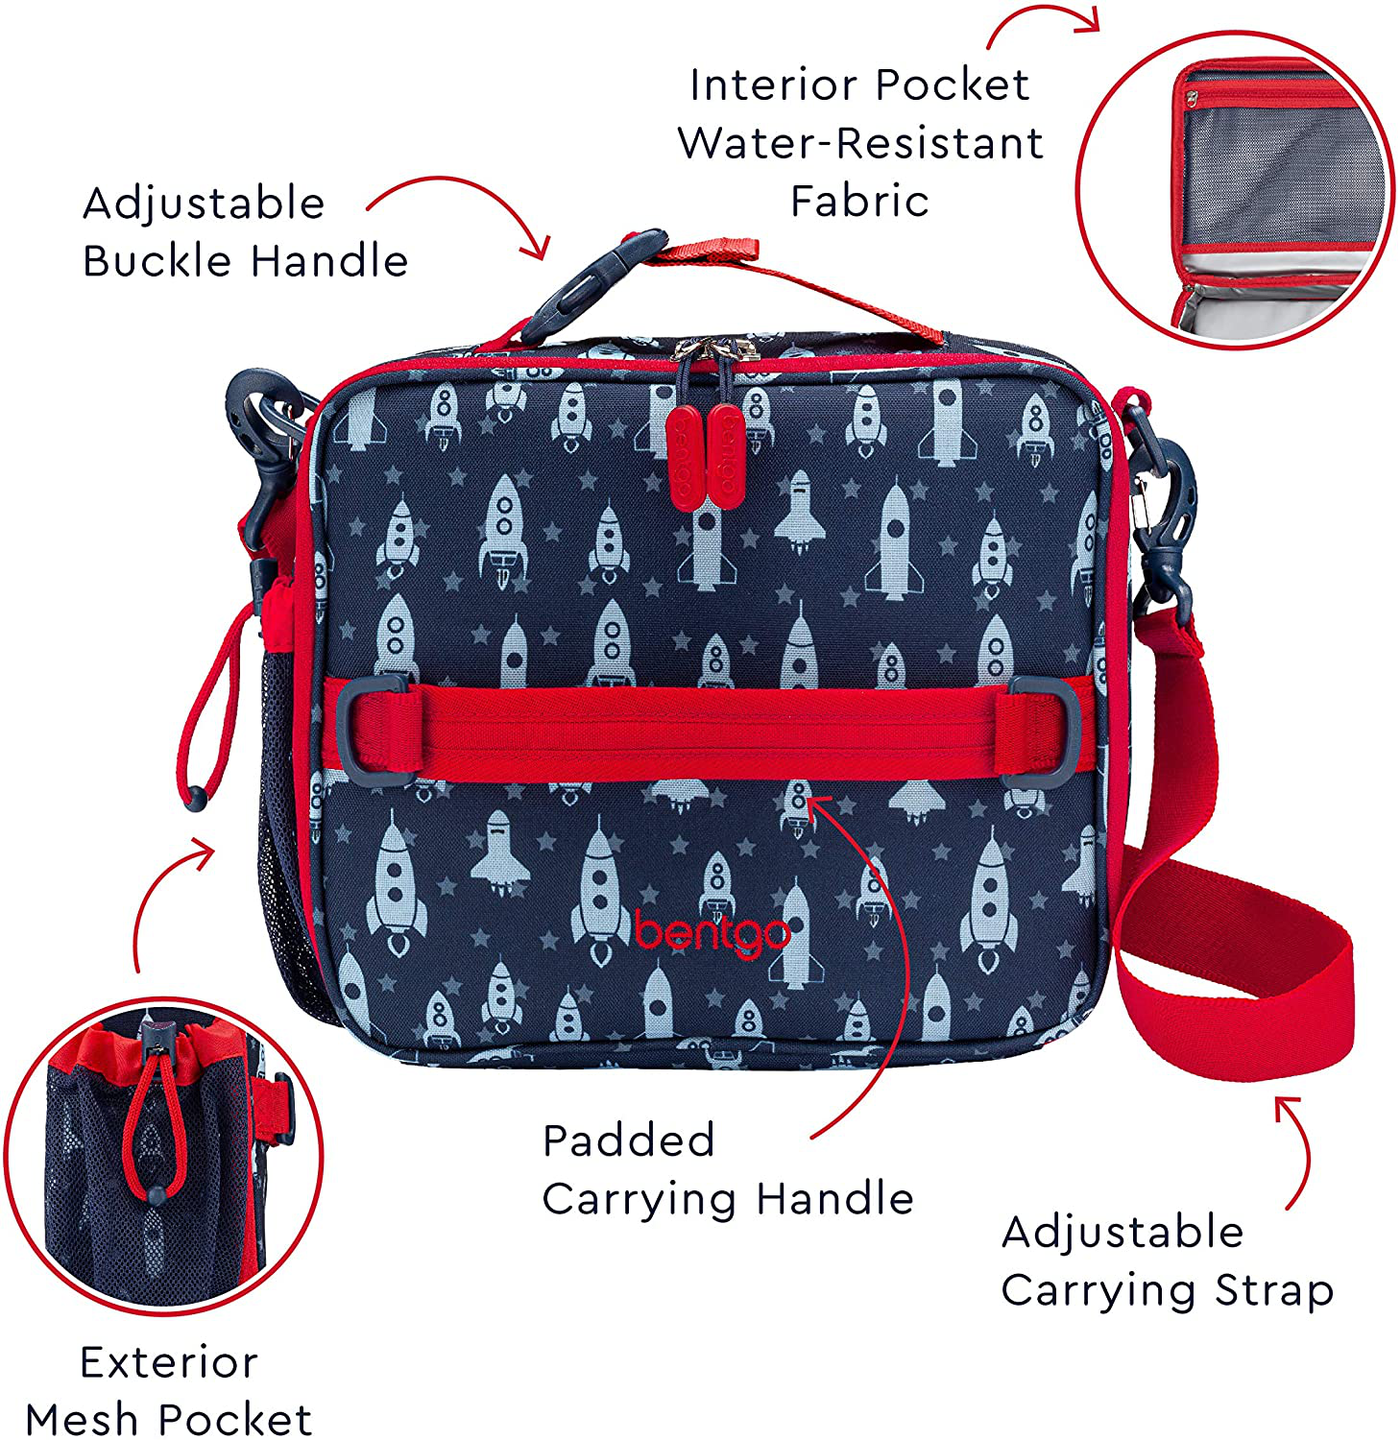 Bentgo Kids Prints Lunch Bag - Double Insulated, Durable, Water-Resistant Fabric with Interior and Exterior Zippered Pockets and External Bottle Holder- Ideal for Children of All Ages (Trucks)